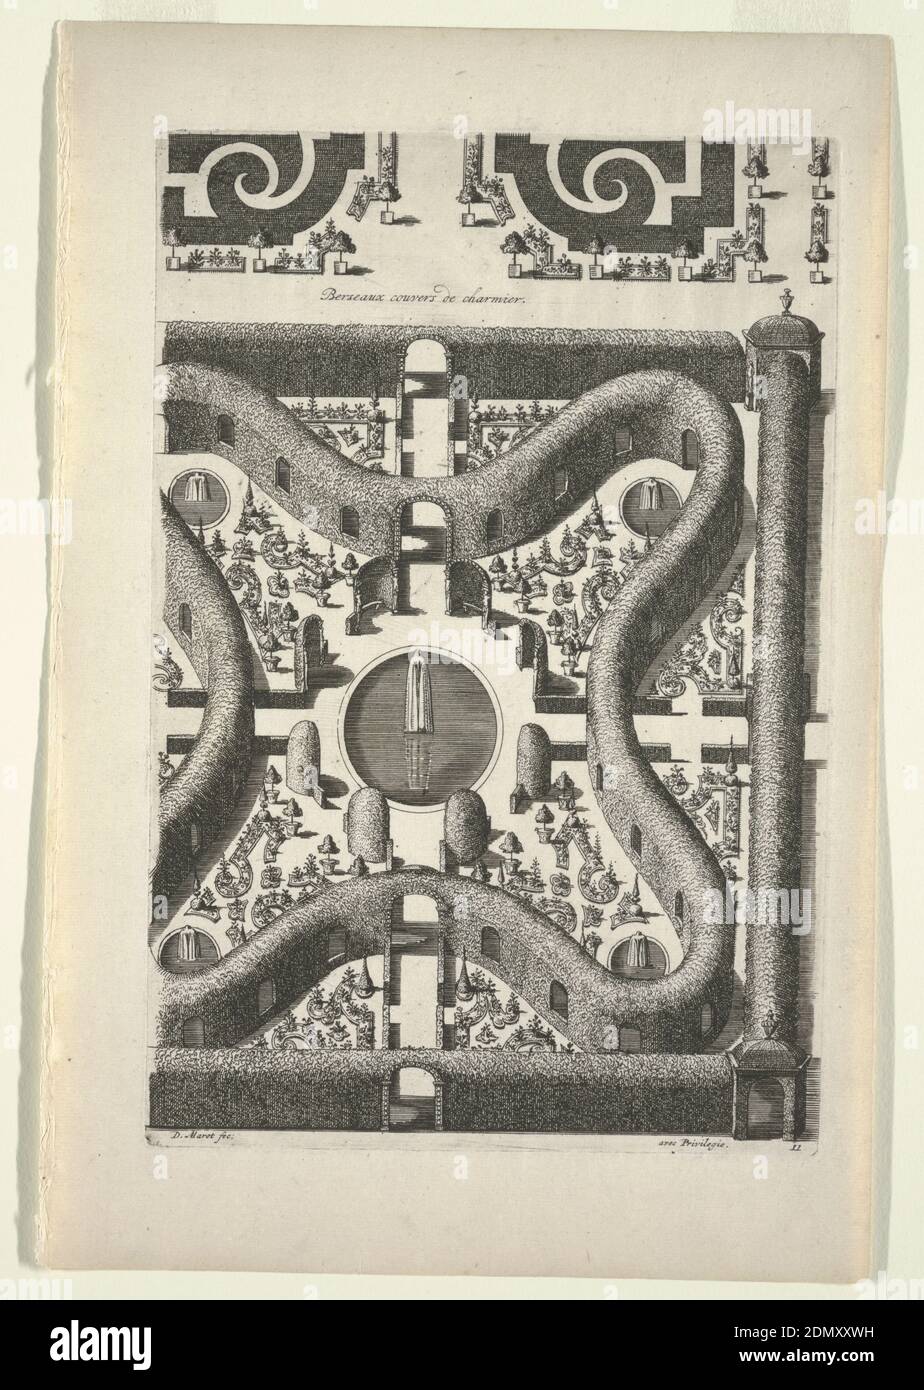 Design for a Garden Parterre of Cut Grass and Colored Gravel, from Nouveaux Livre de Parterres (New Book of Garden Beds) from Oeuvres du Sr. Marot, Daniel Marot, French, active in the Netherlands and England, 1661–1752, Pierre Husson, Etching on cream laid paper, Garden design with four curved points and fountain with statue at center., ca. 1700, architecture, Print Stock Photo